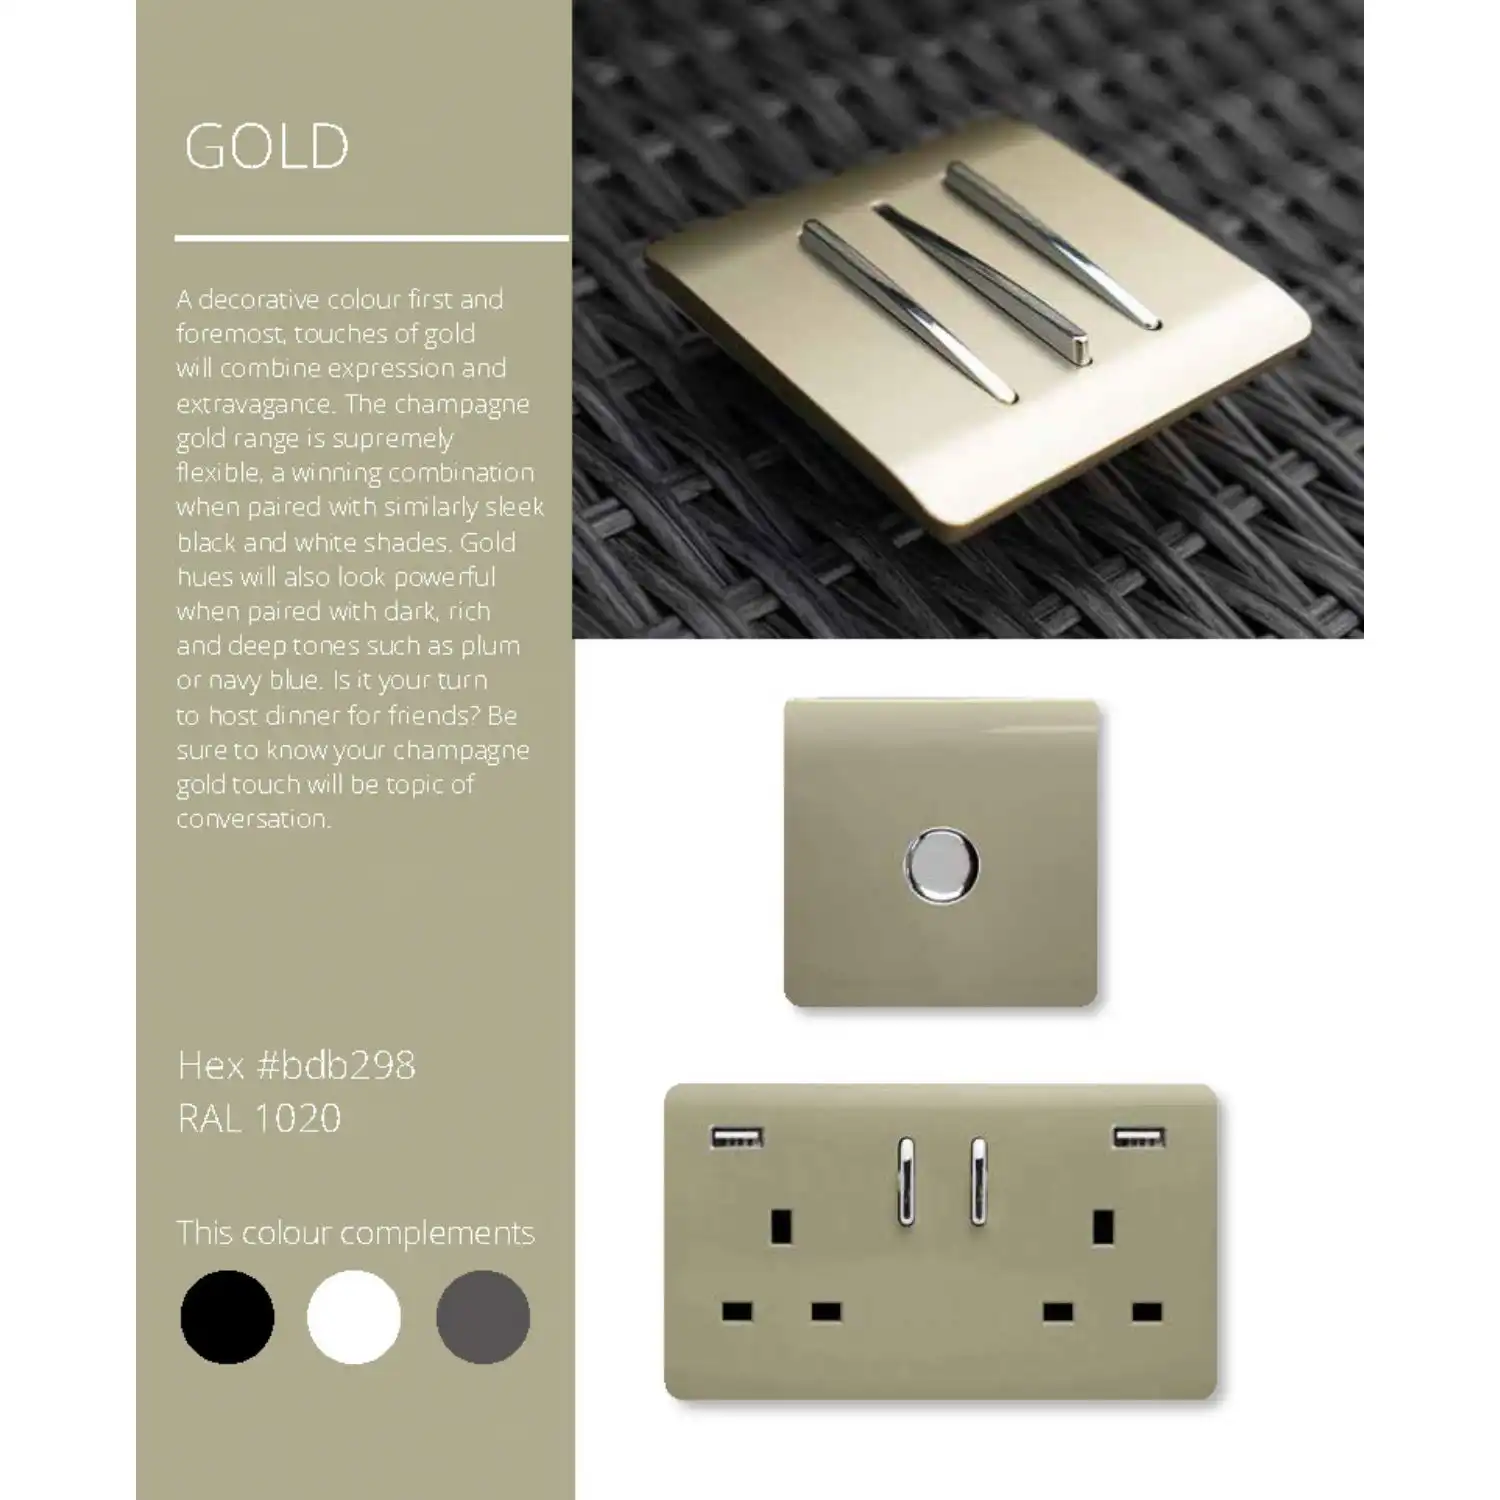 Trendi, Artistic Modern 2 Gang 13A Switched Double Socket With 4X 2.1Mah USB Champagne Gold Finish, BRITISH MADE, (45mm Back Box Required) 5yrs Wrnty